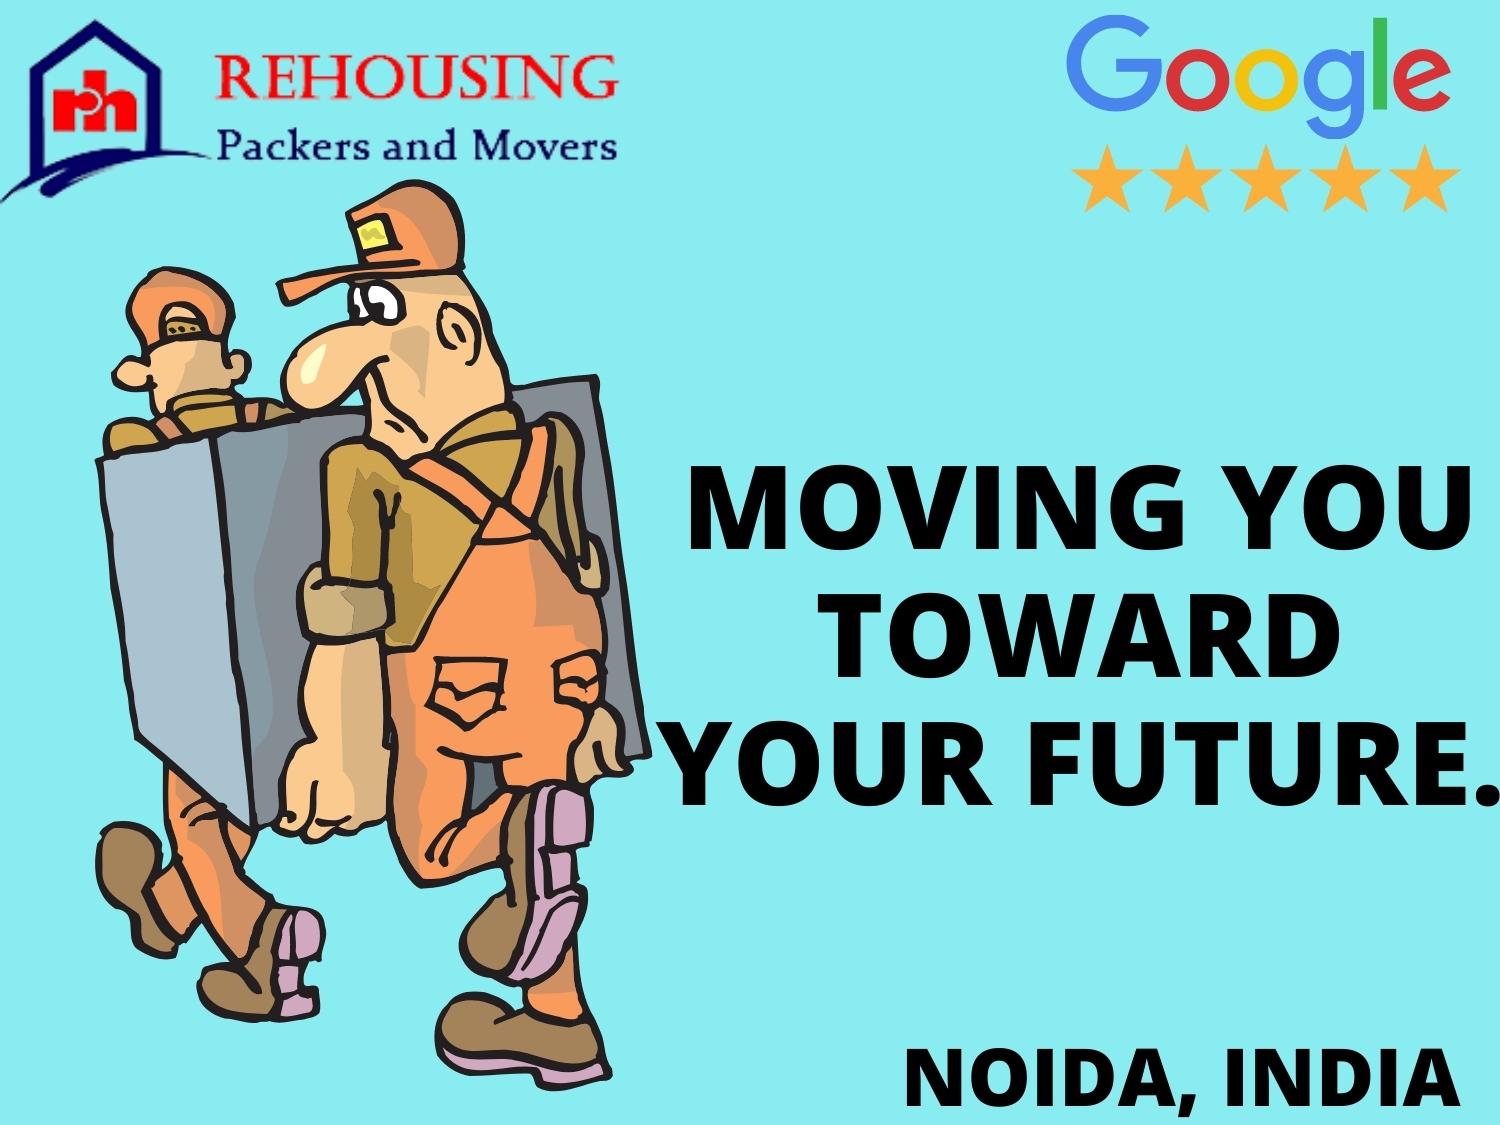  hiring packers and movers in Noida